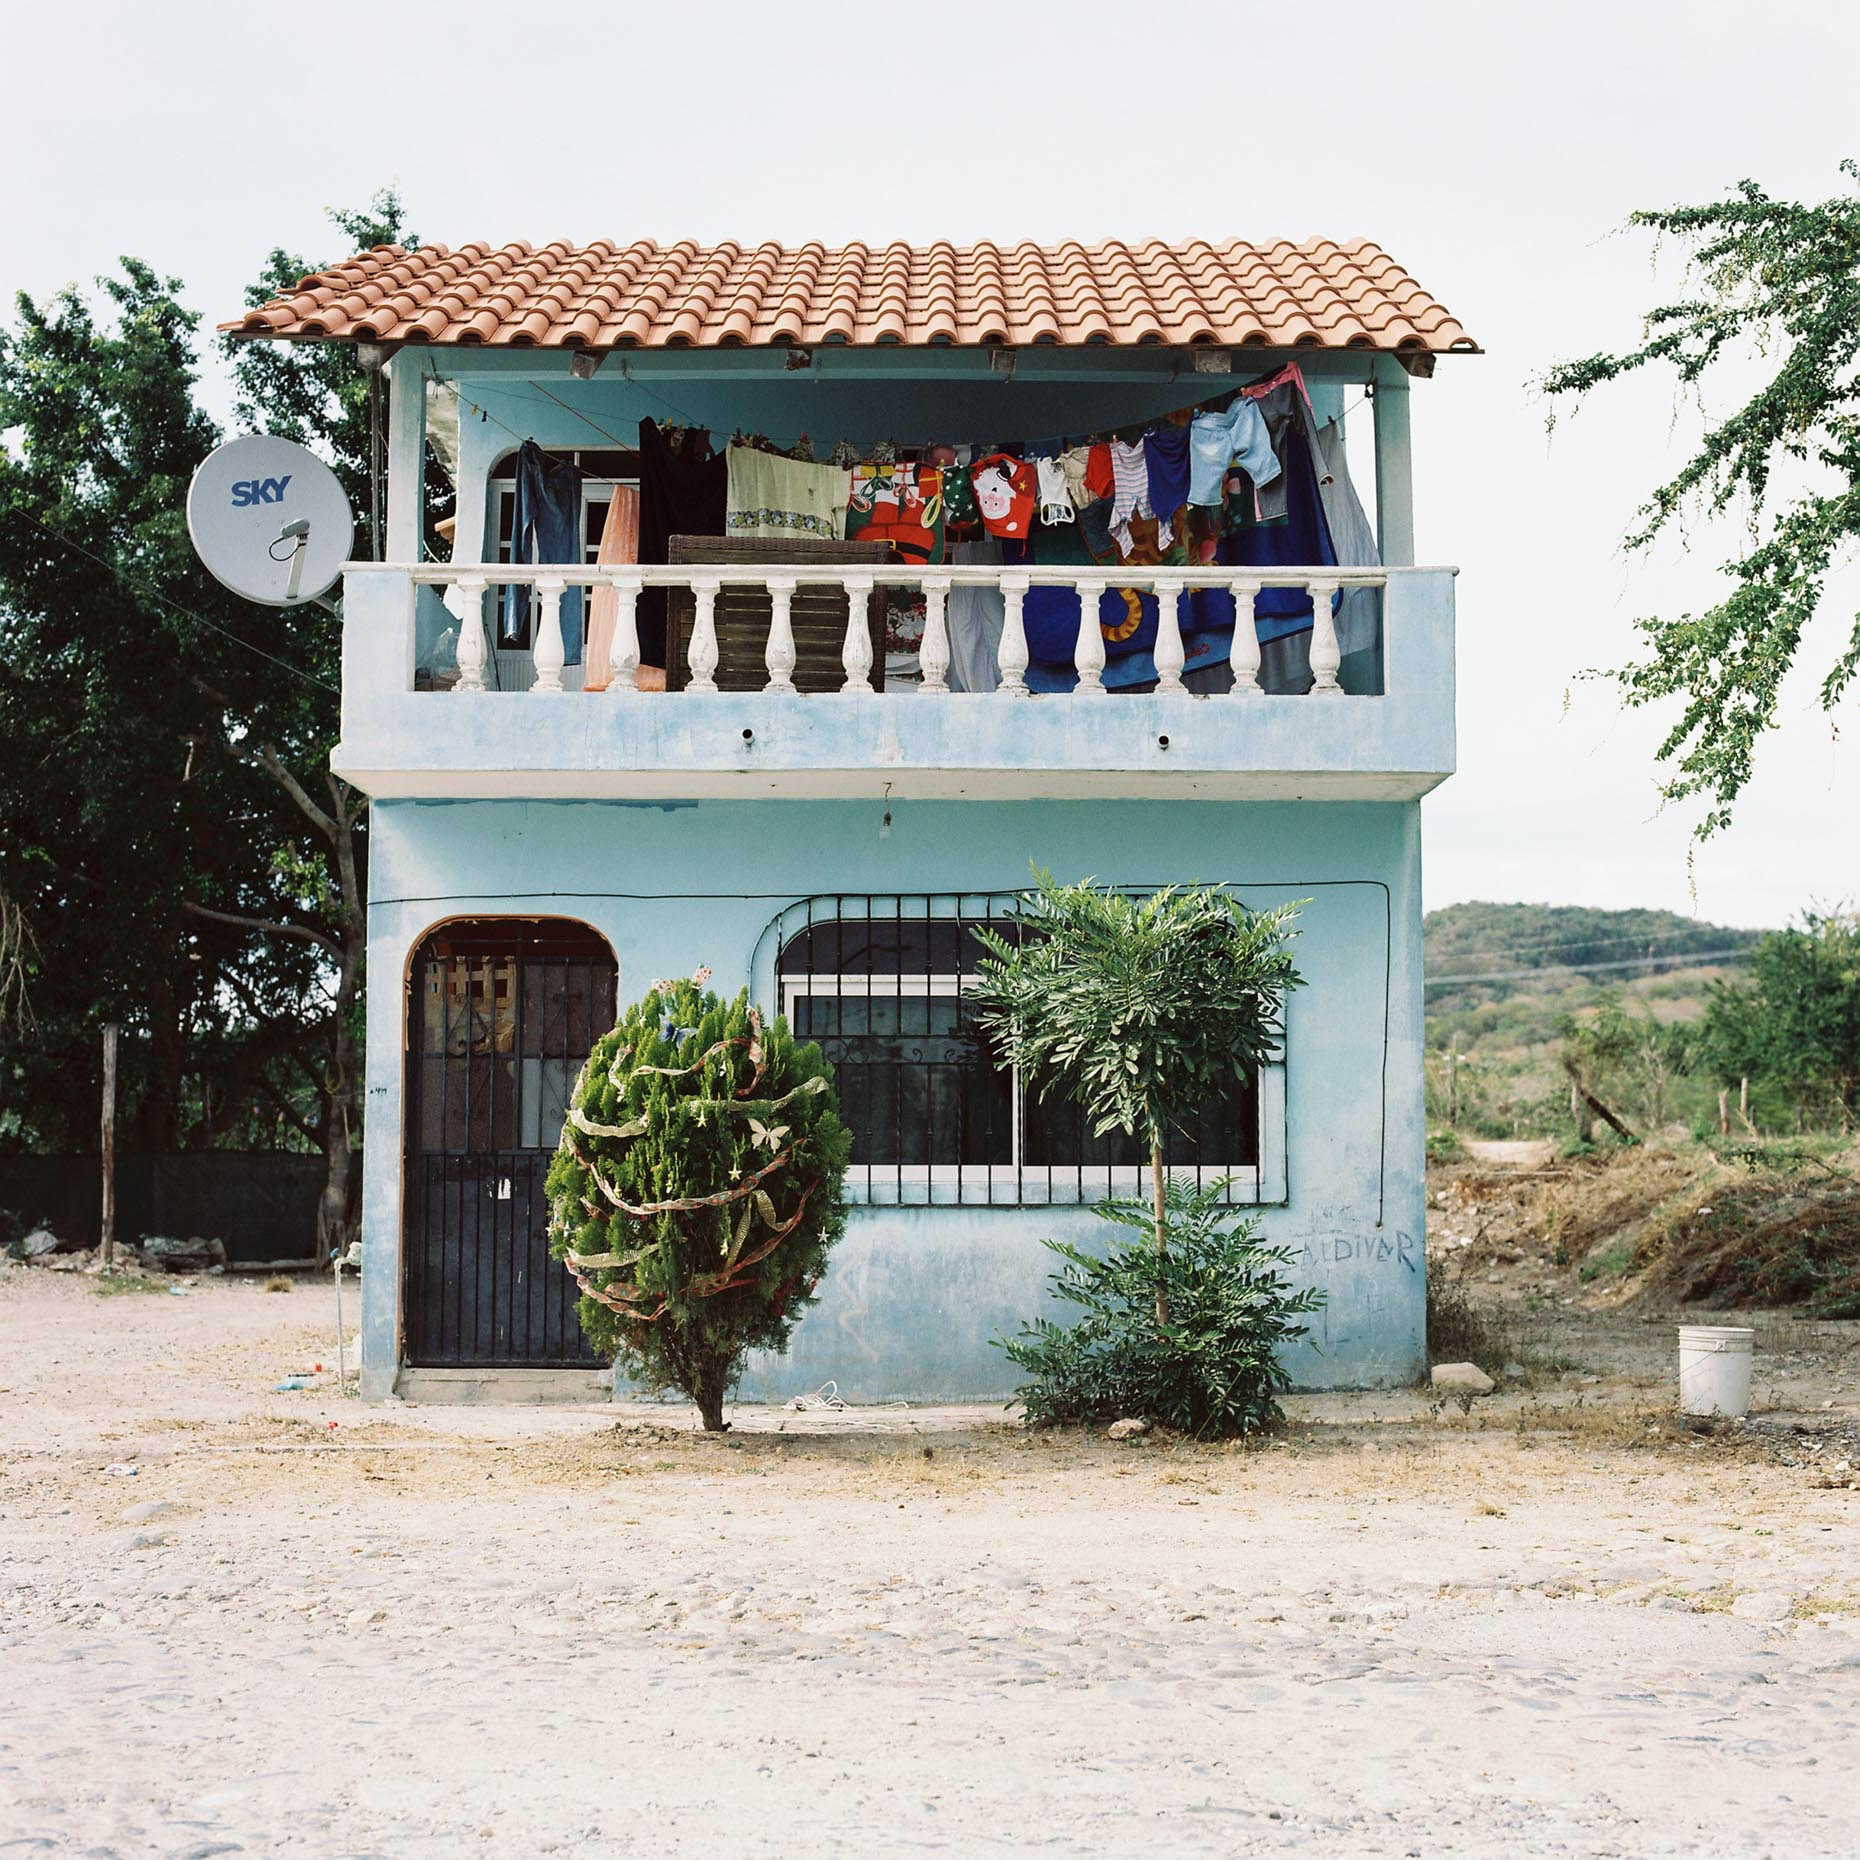 A house in Punta DiMta in Mexico on the Pacific Caost a few weeks after Christmas. 